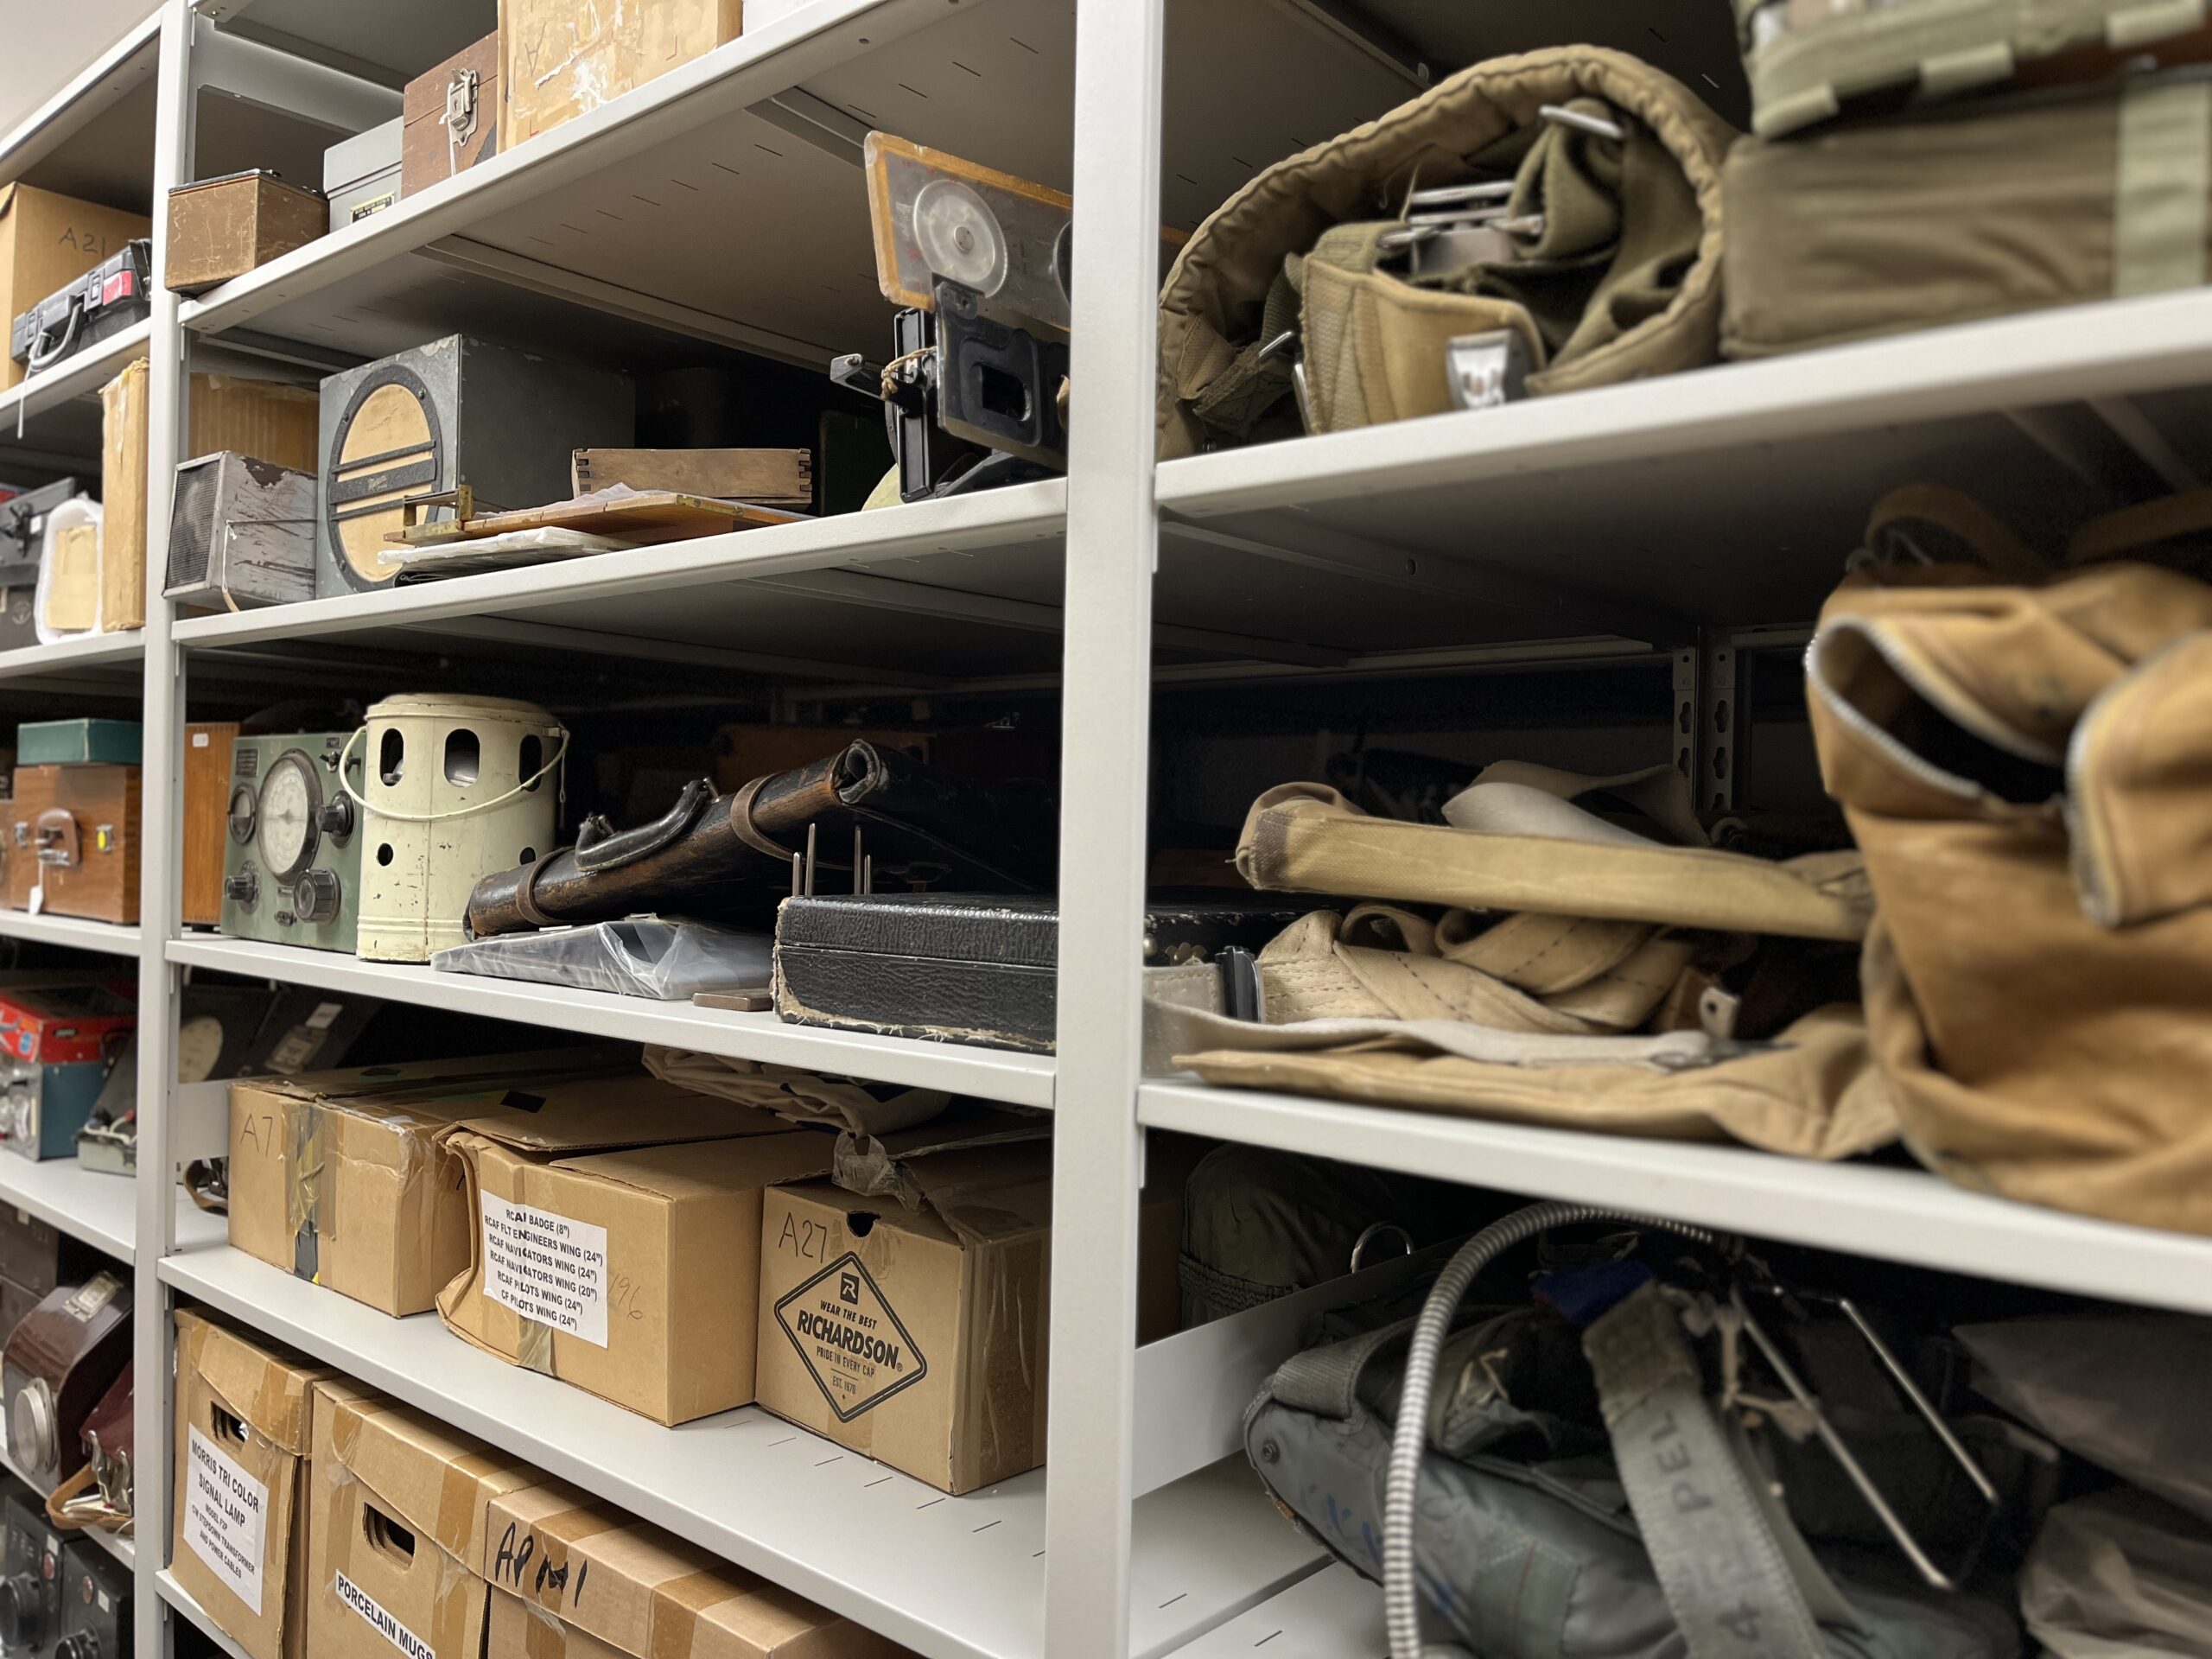 Assorted aviation artefacts sit on metal shelving in the Royal Aviation Museum's state-of-the-art collections and archives storage